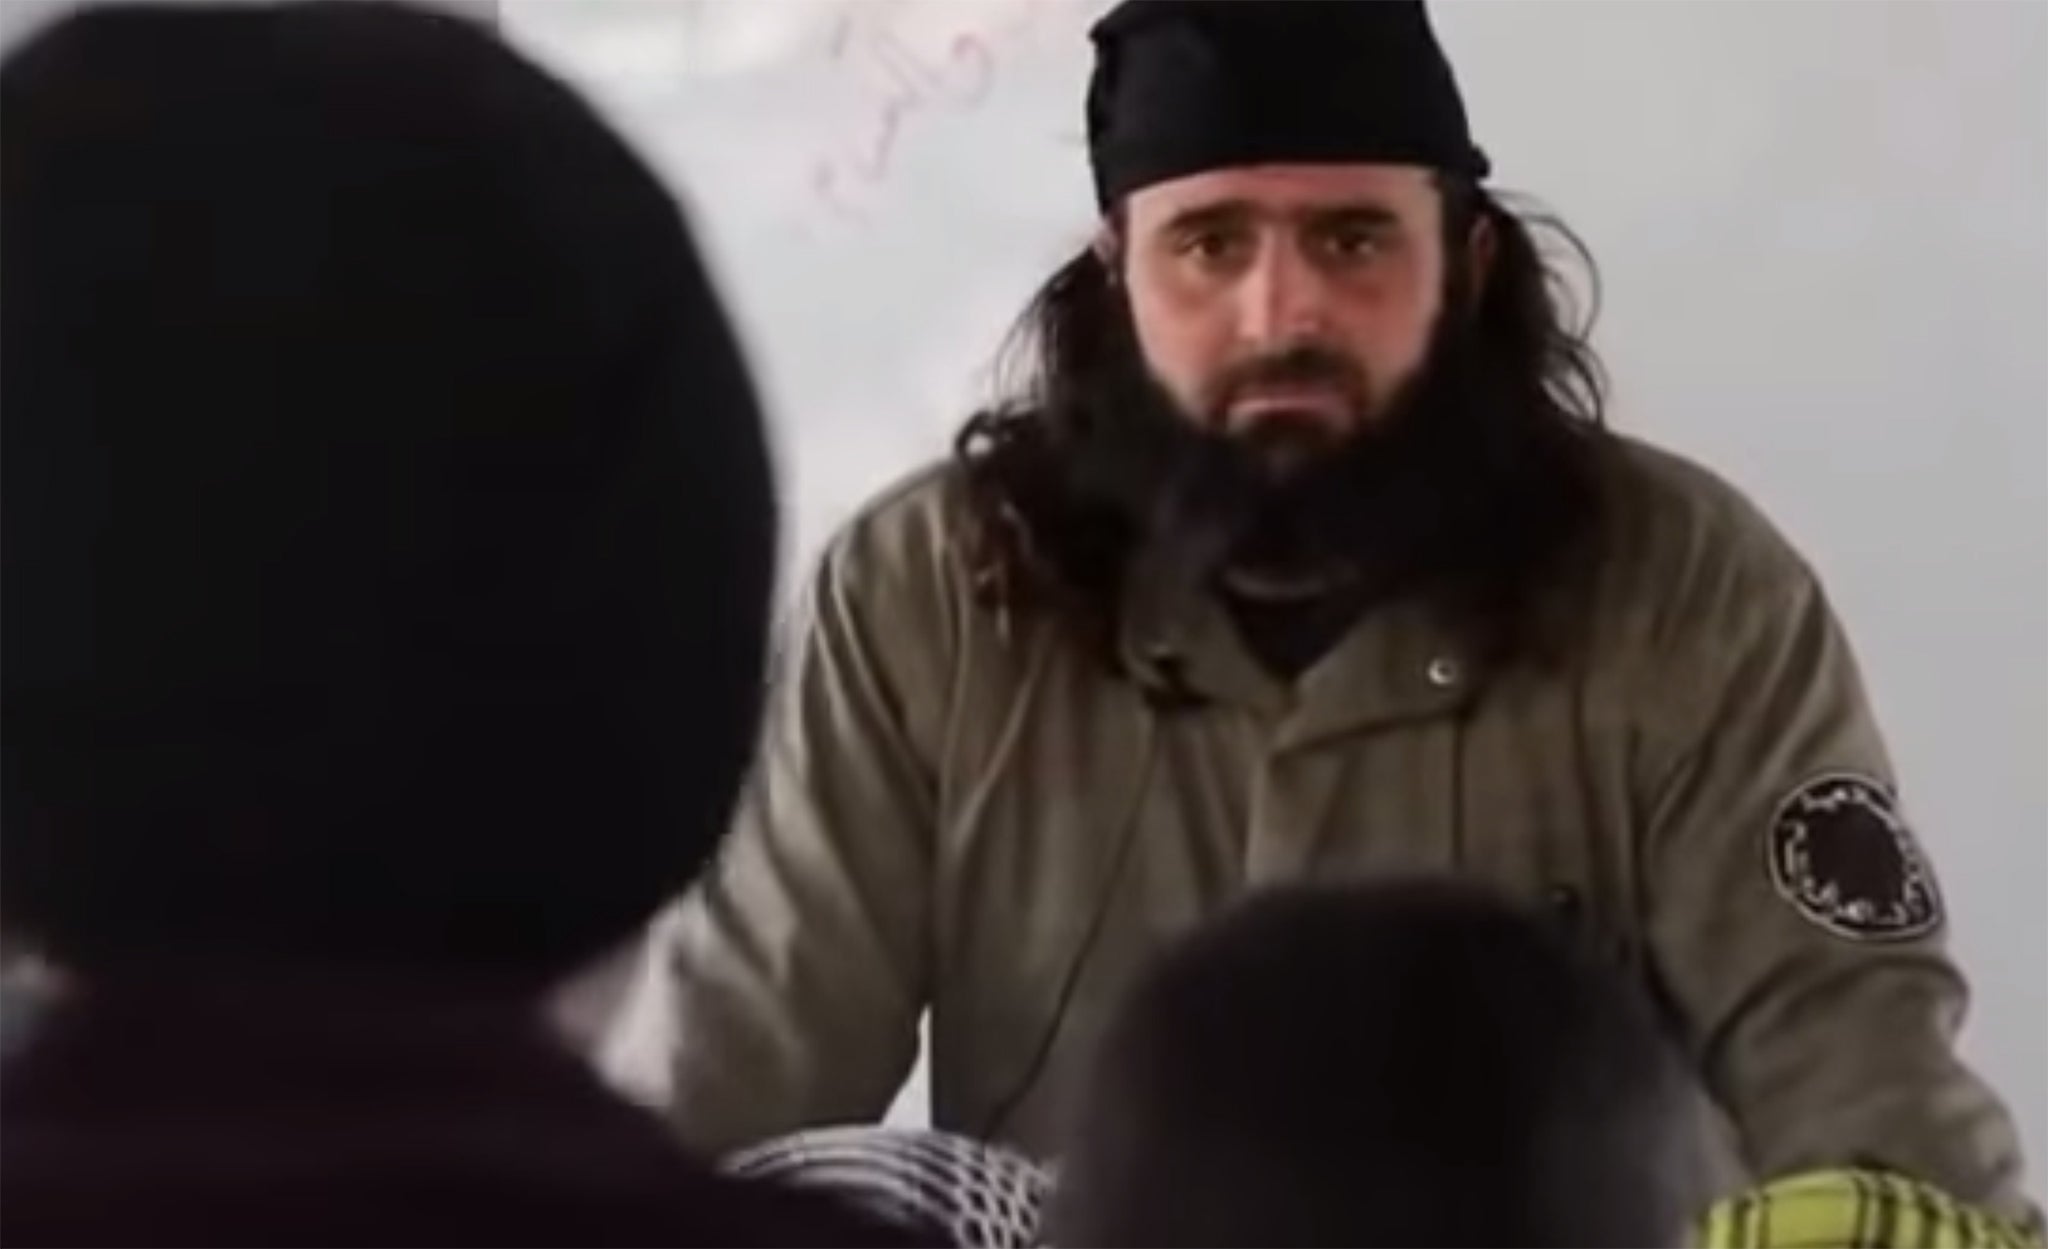 The boys' apparent teacher asks them questions about the tenets of Islam